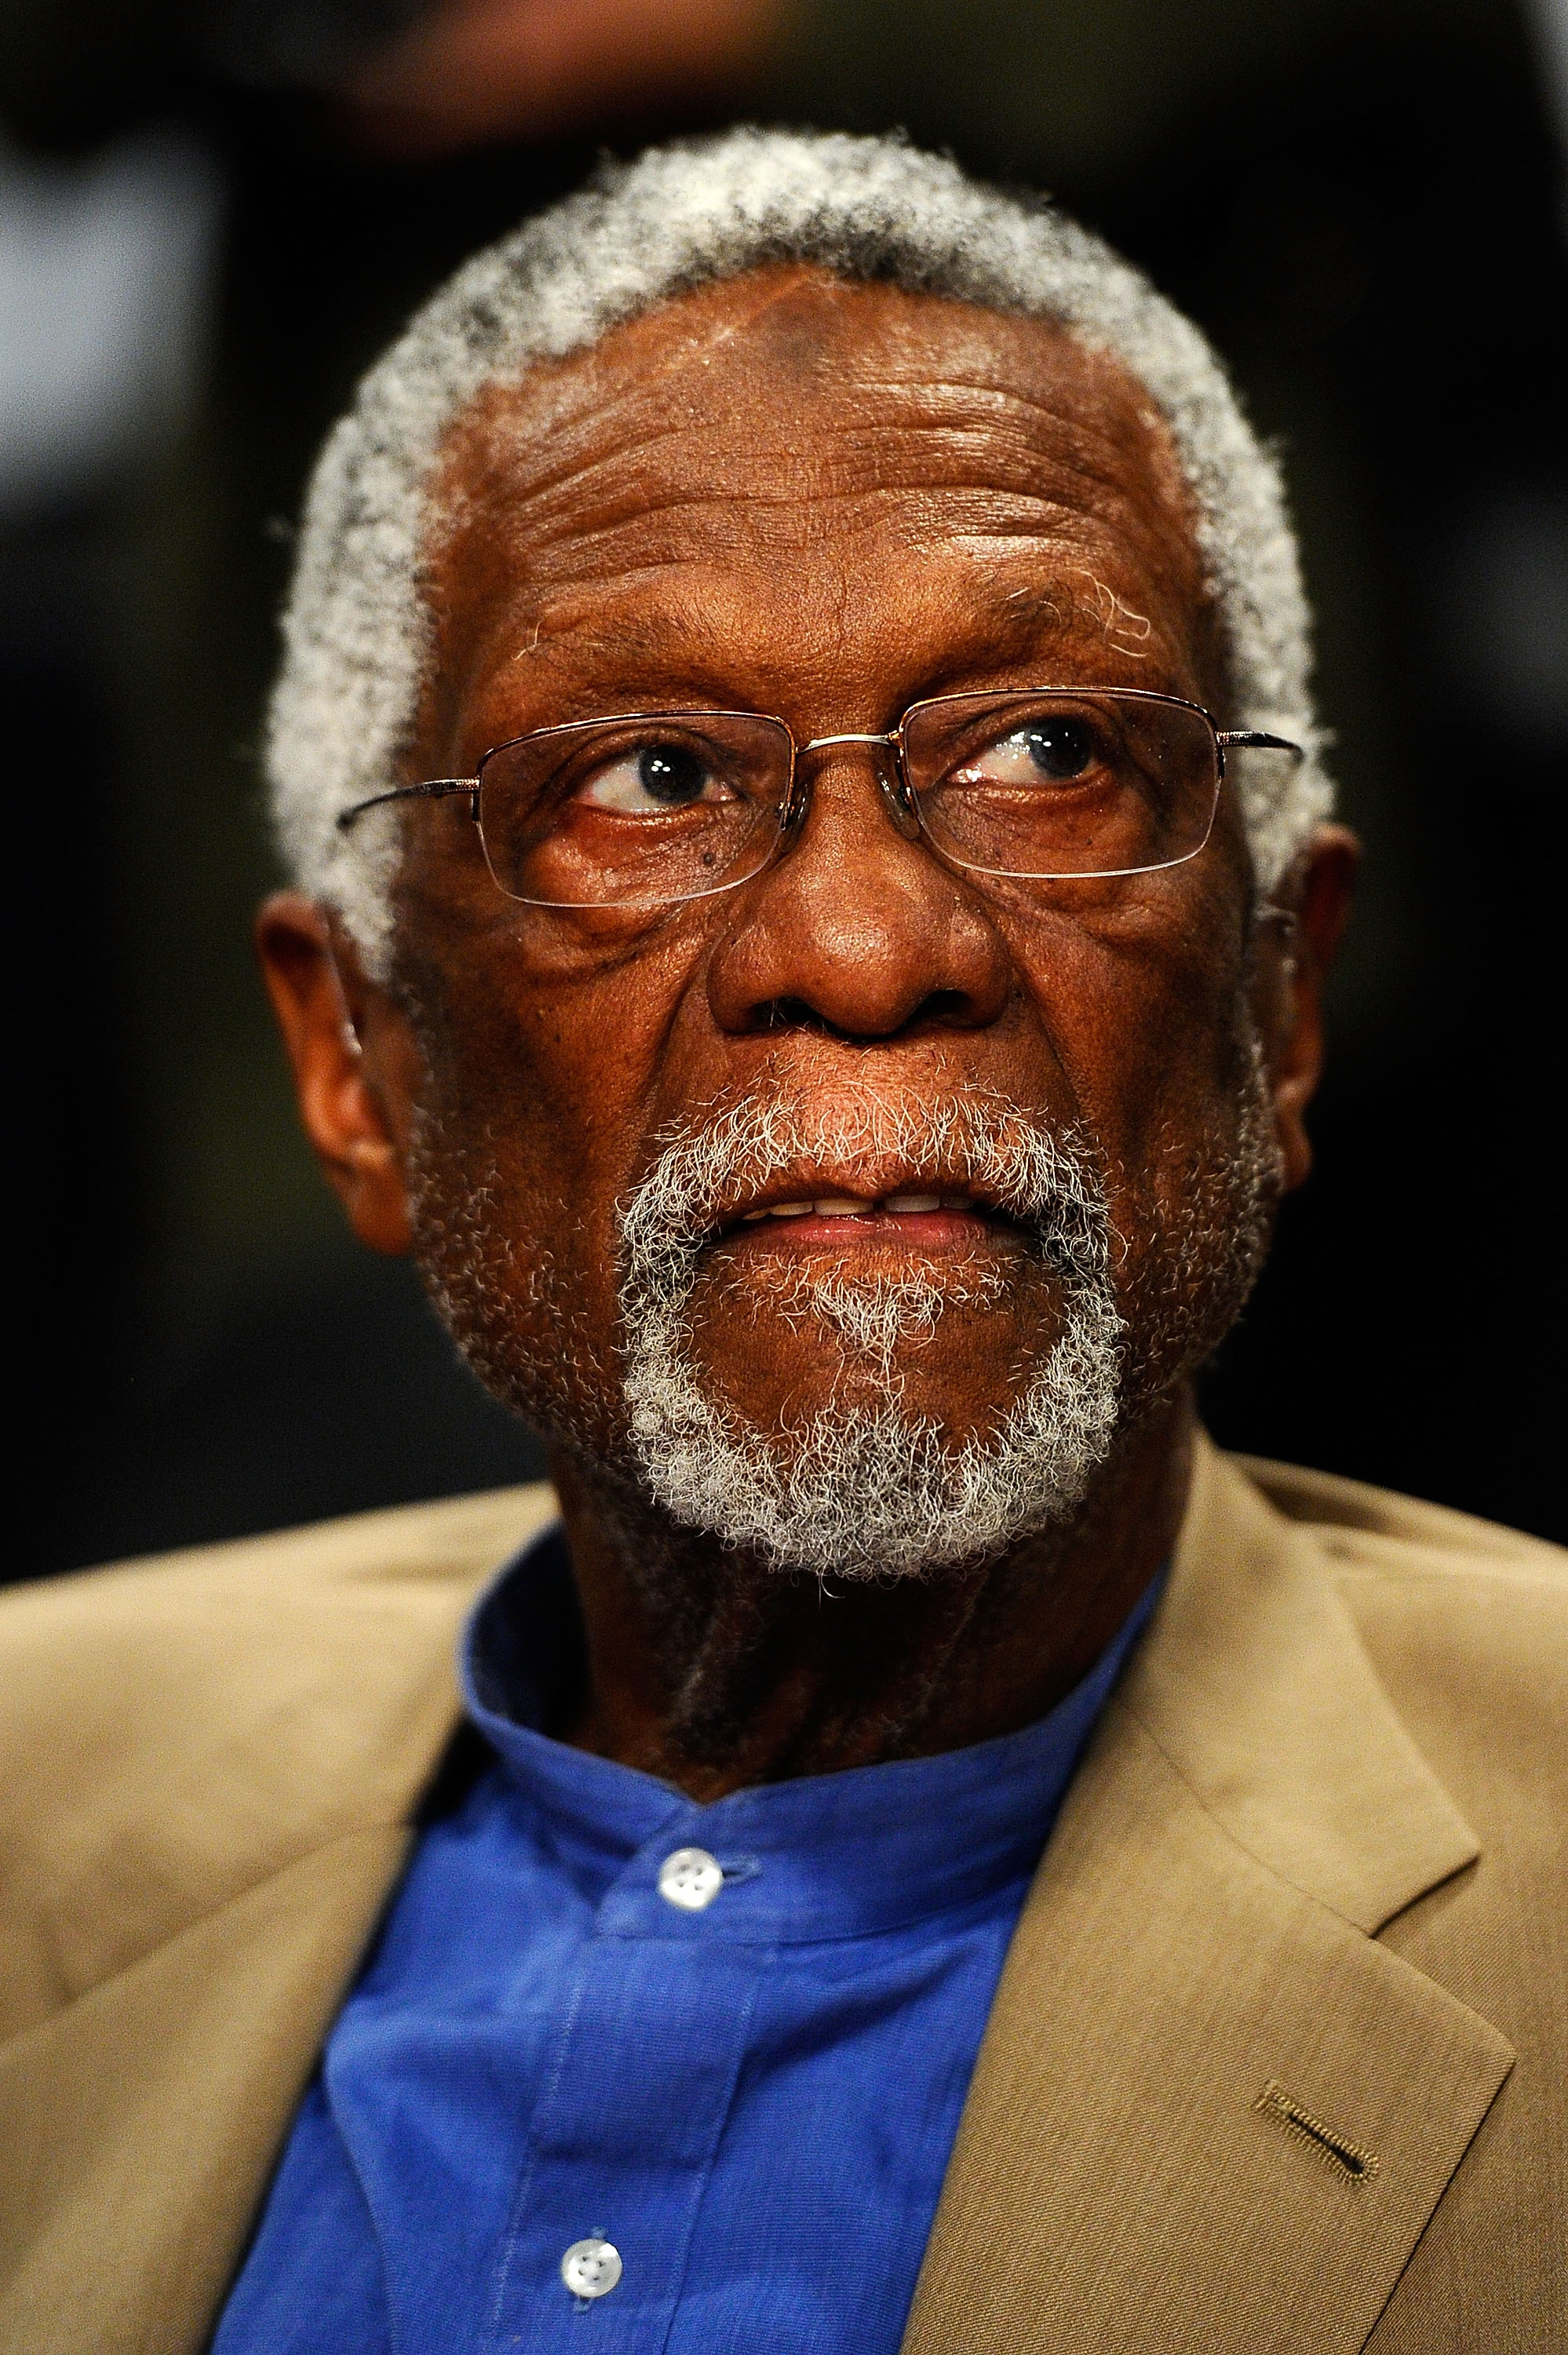 LOS ANGELES, CA - FEBRUARY 19:  NBA legend Bill Russell looks on as he attends NBA All-Star Saturday night presented by State Farm at Staples Center on February 19, 2011 in Los Angeles, California.  (Photo by Kevork Djansezian/Getty Images)